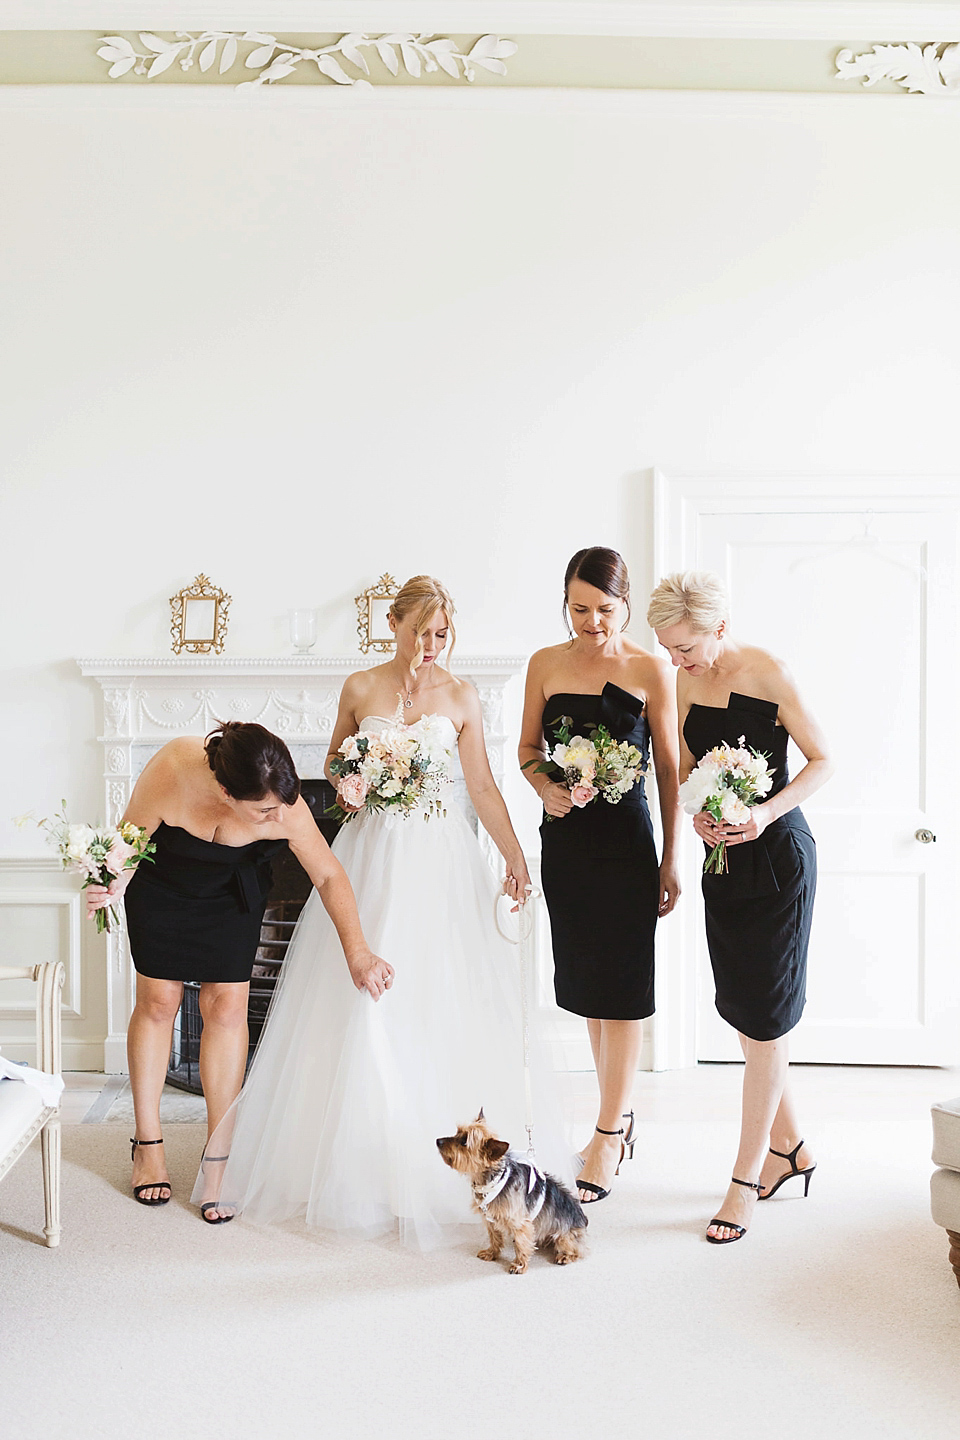 A Tulle Gown and Bridesmaids in Black for an Elegant Travel Inspired Wedding. Photography by Miss Gen.